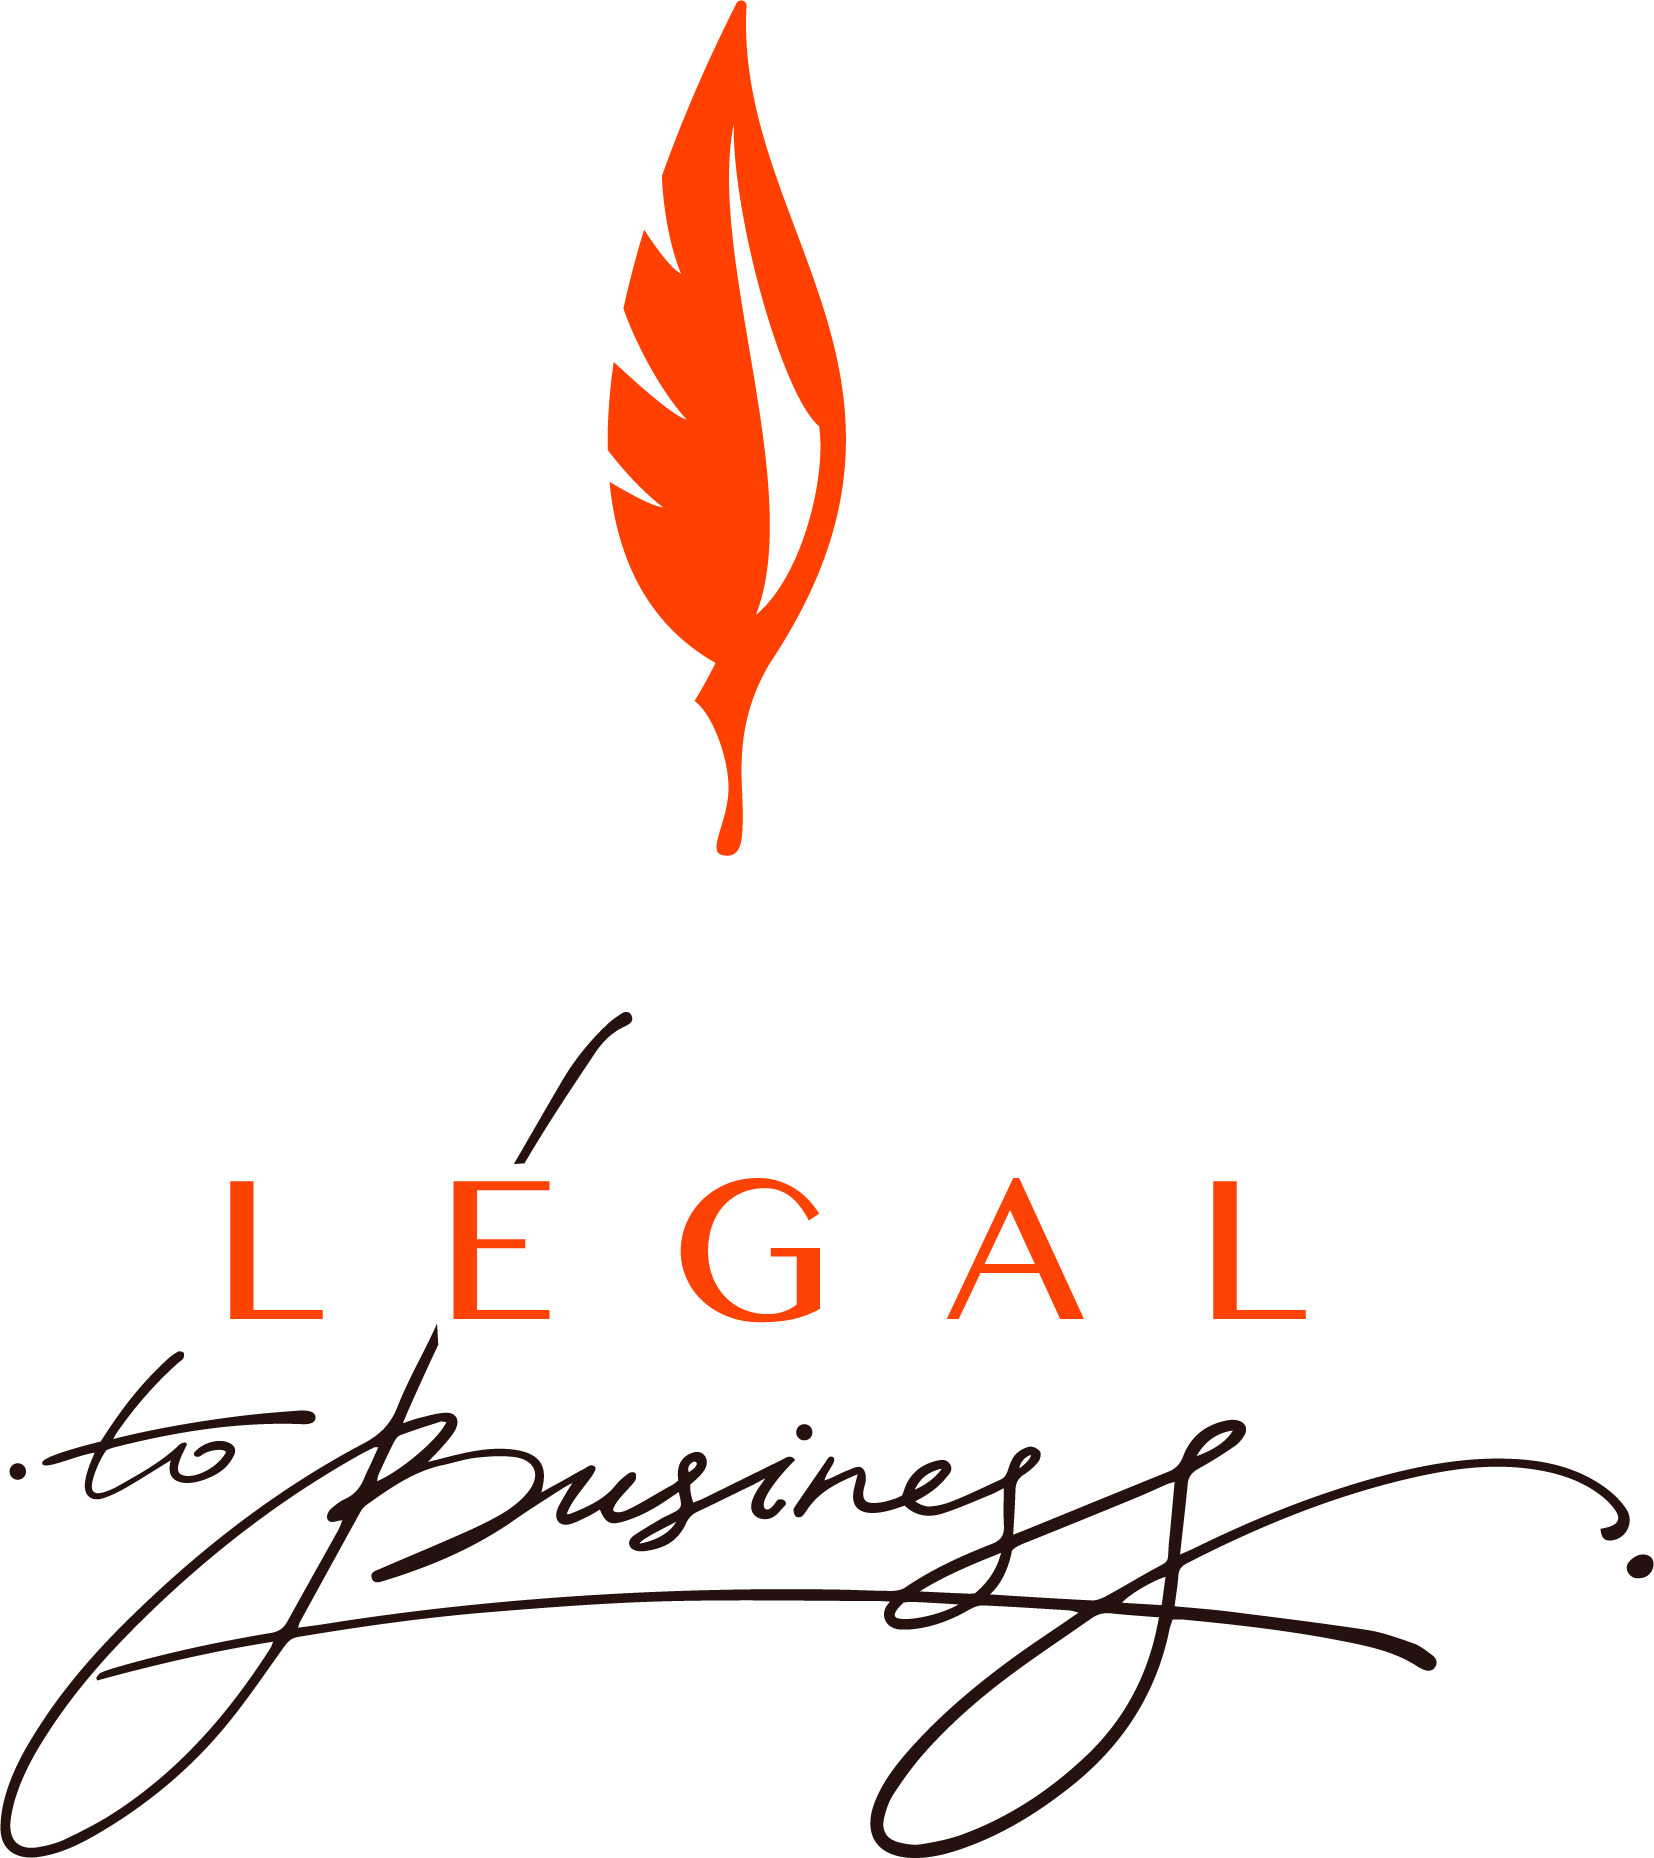 LEGAL TO BUSINESS